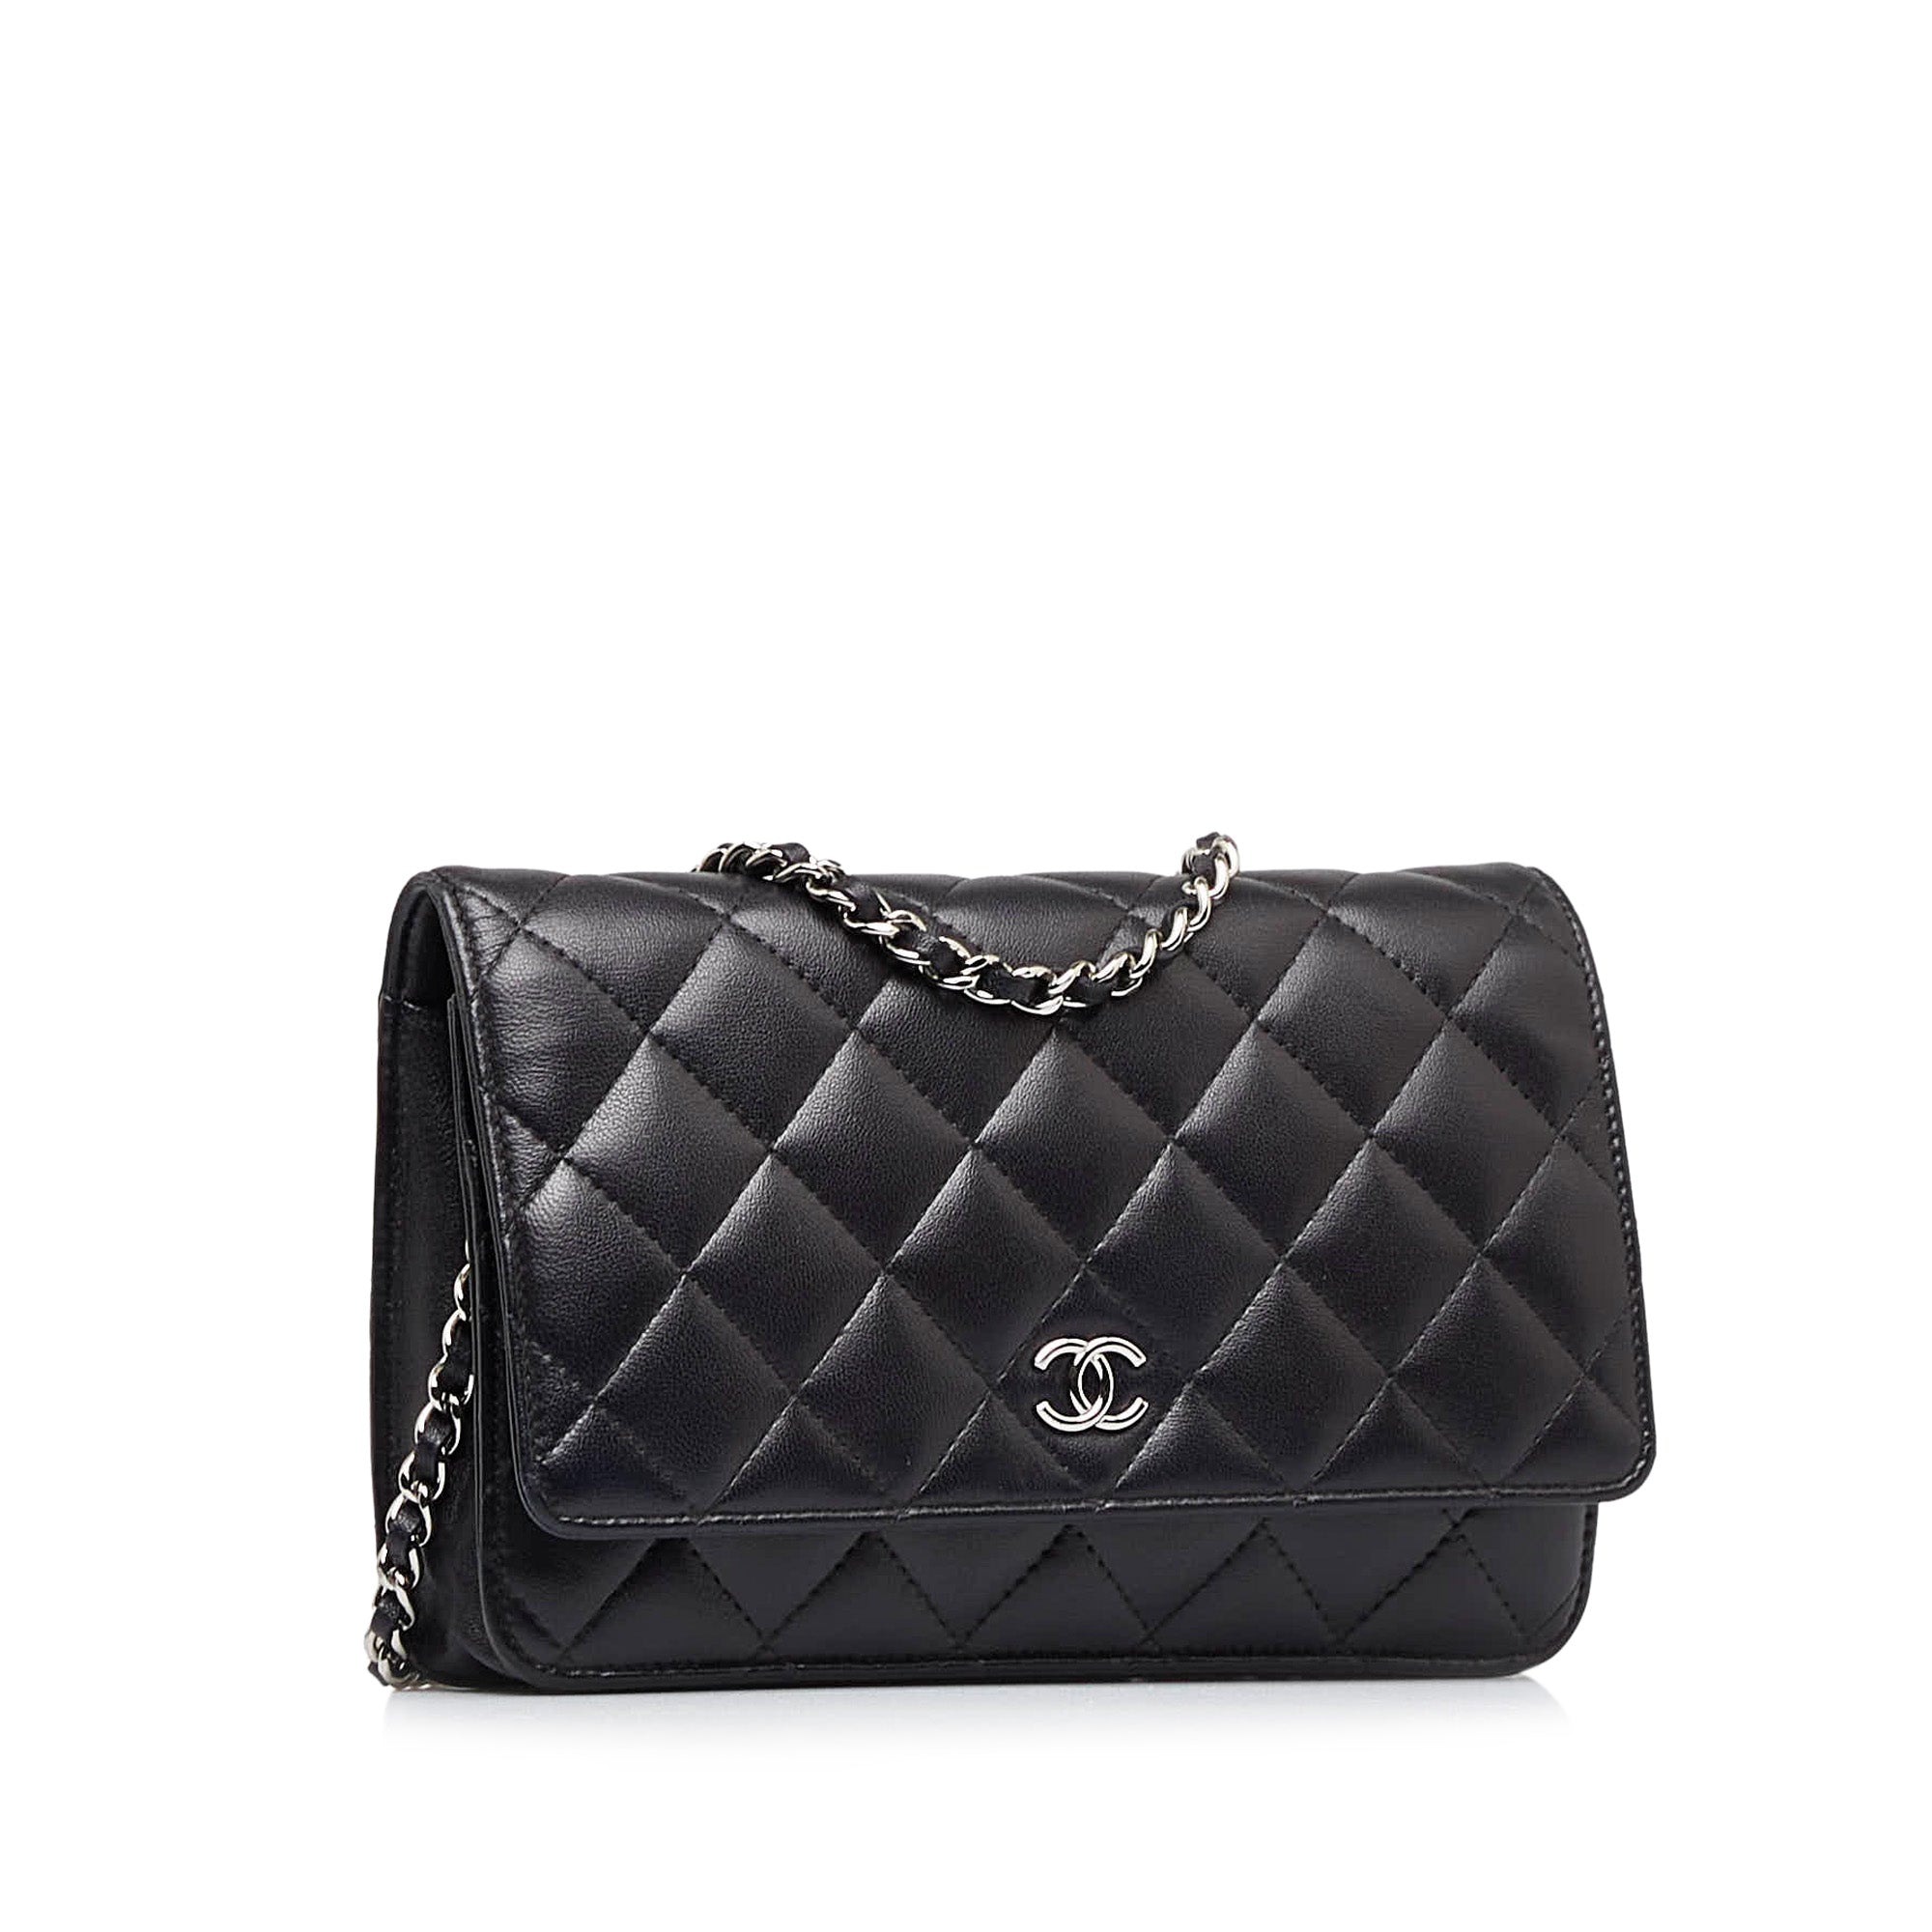 Chanel Mini Timeless handbag in red quilted leather, Cra-wallonieShops  Revival